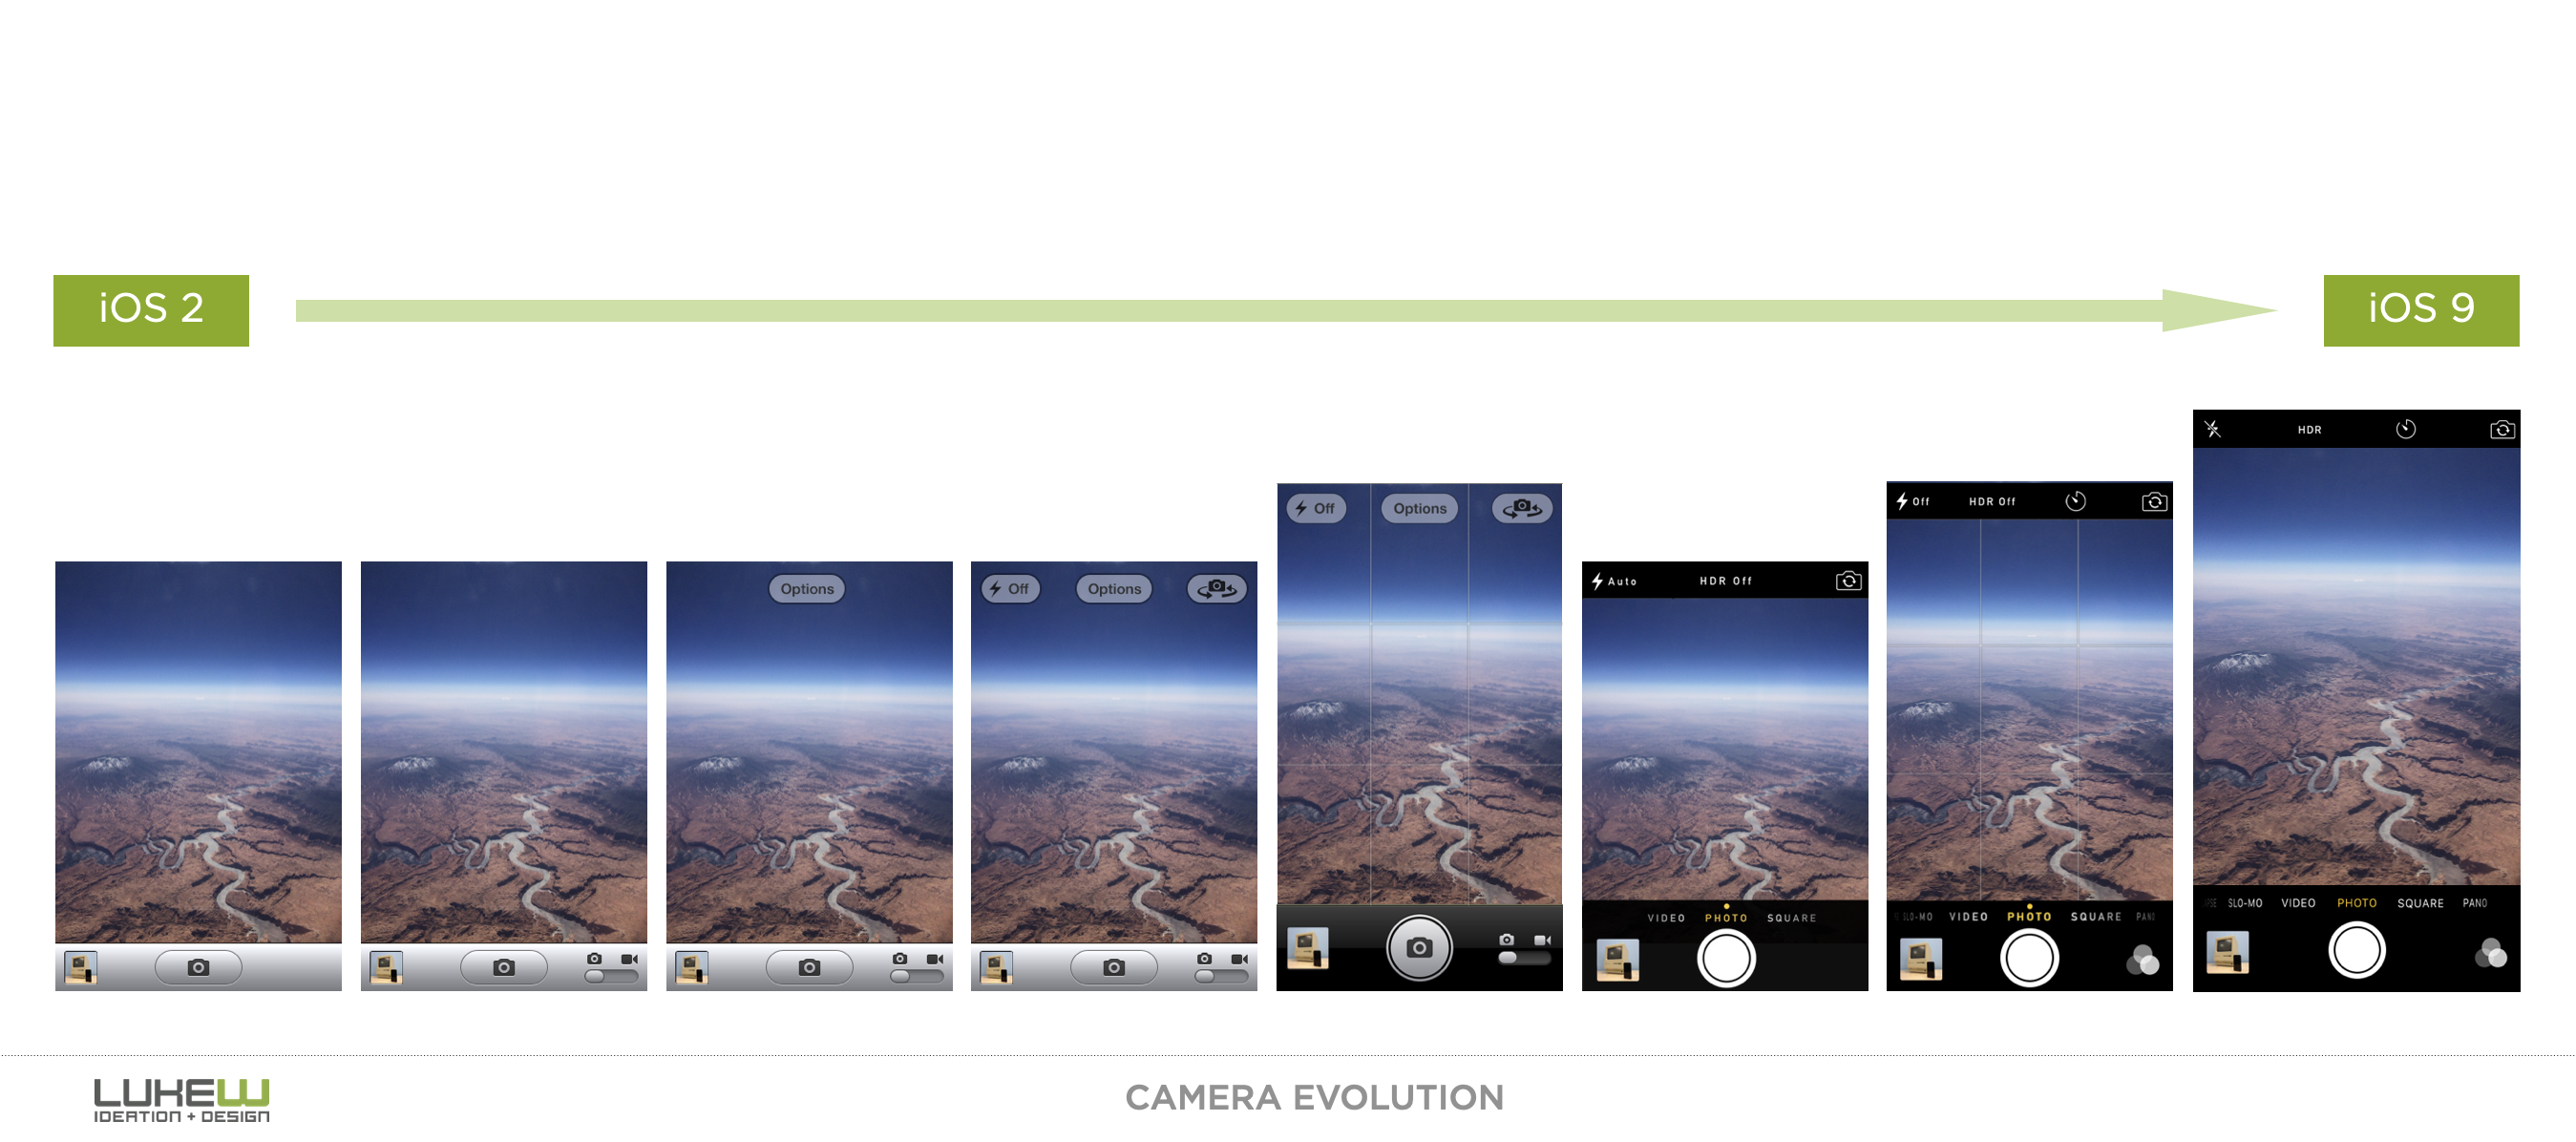 Design is never done: the iOS camera edition